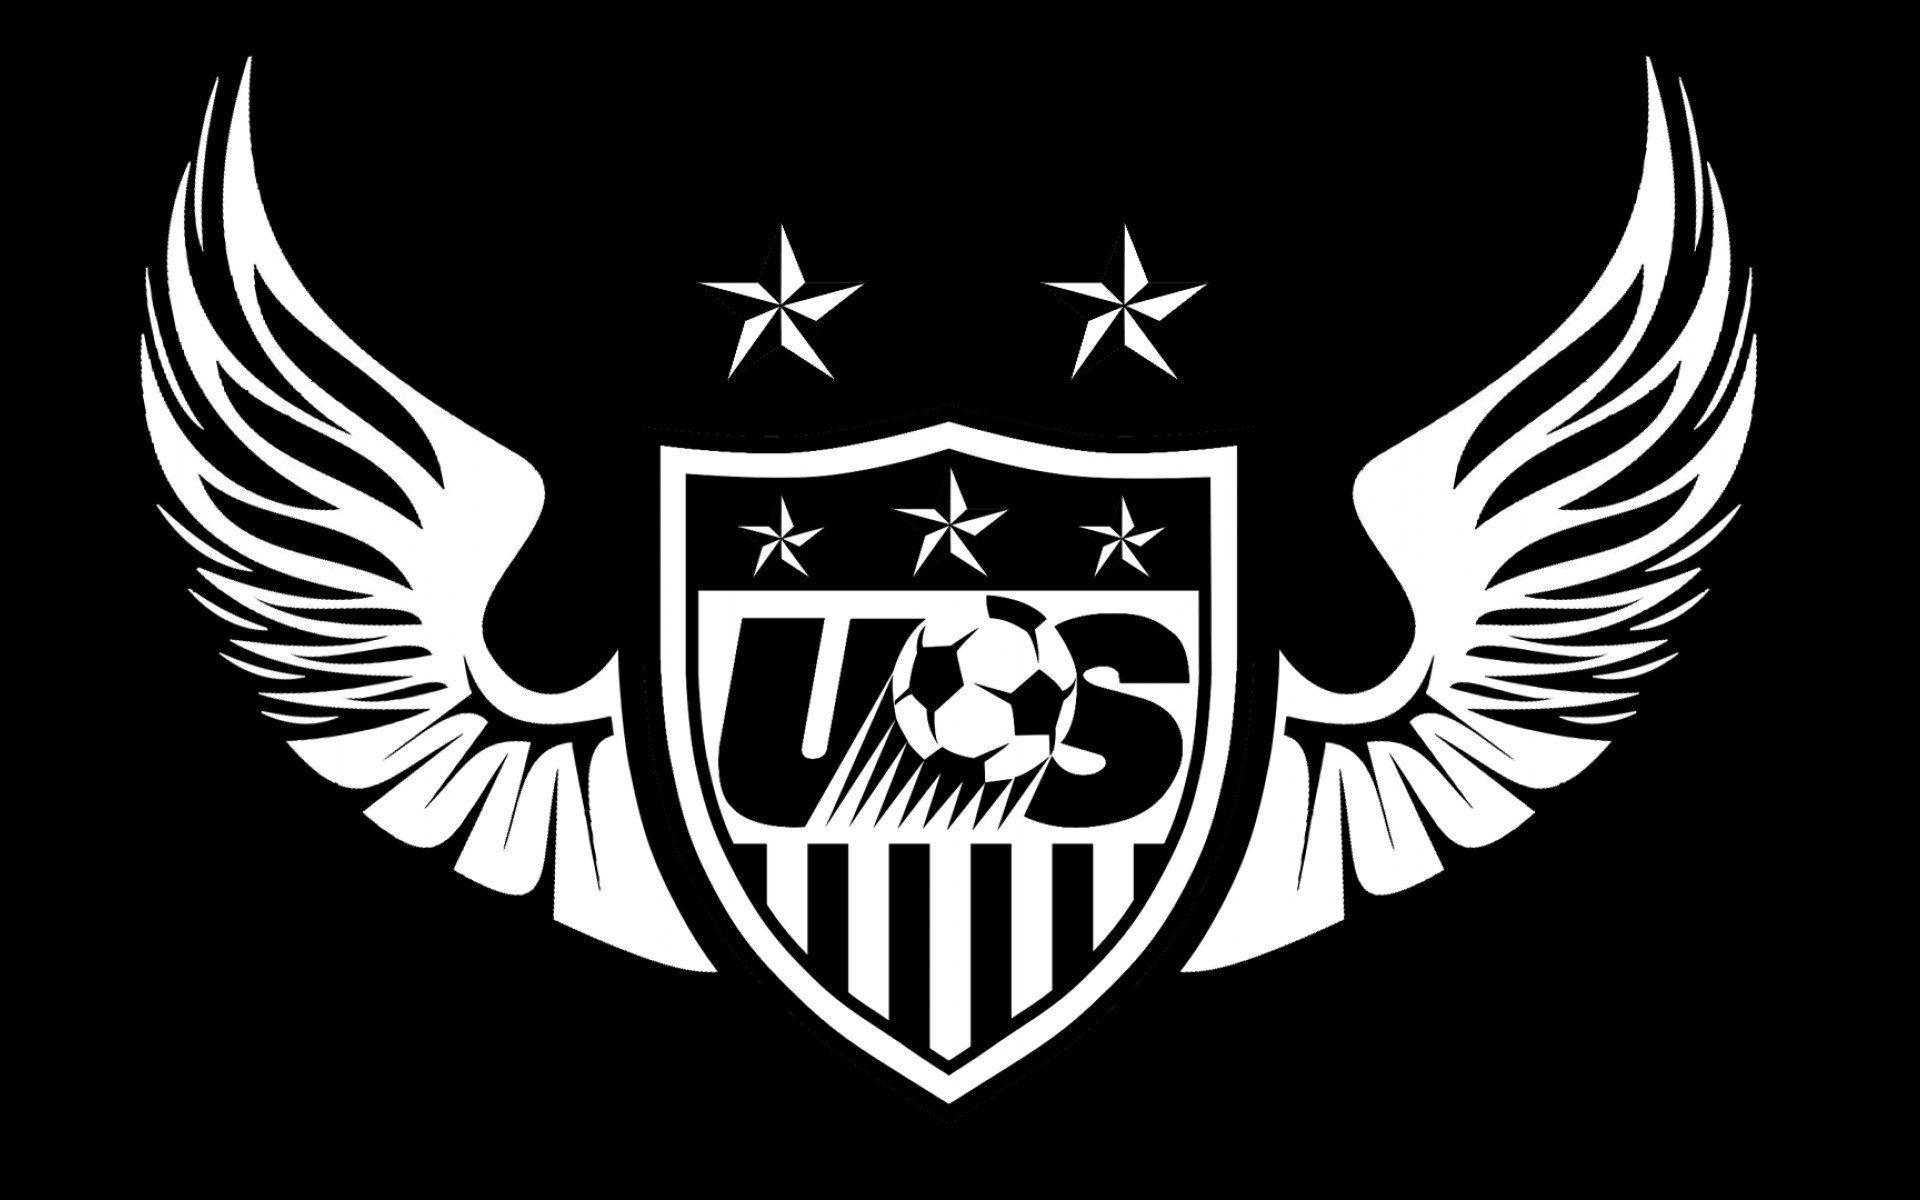 Black and White Soccer Teams Logo - 45+ U.S. Soccer Wallpapers - Download at WallpaperBro